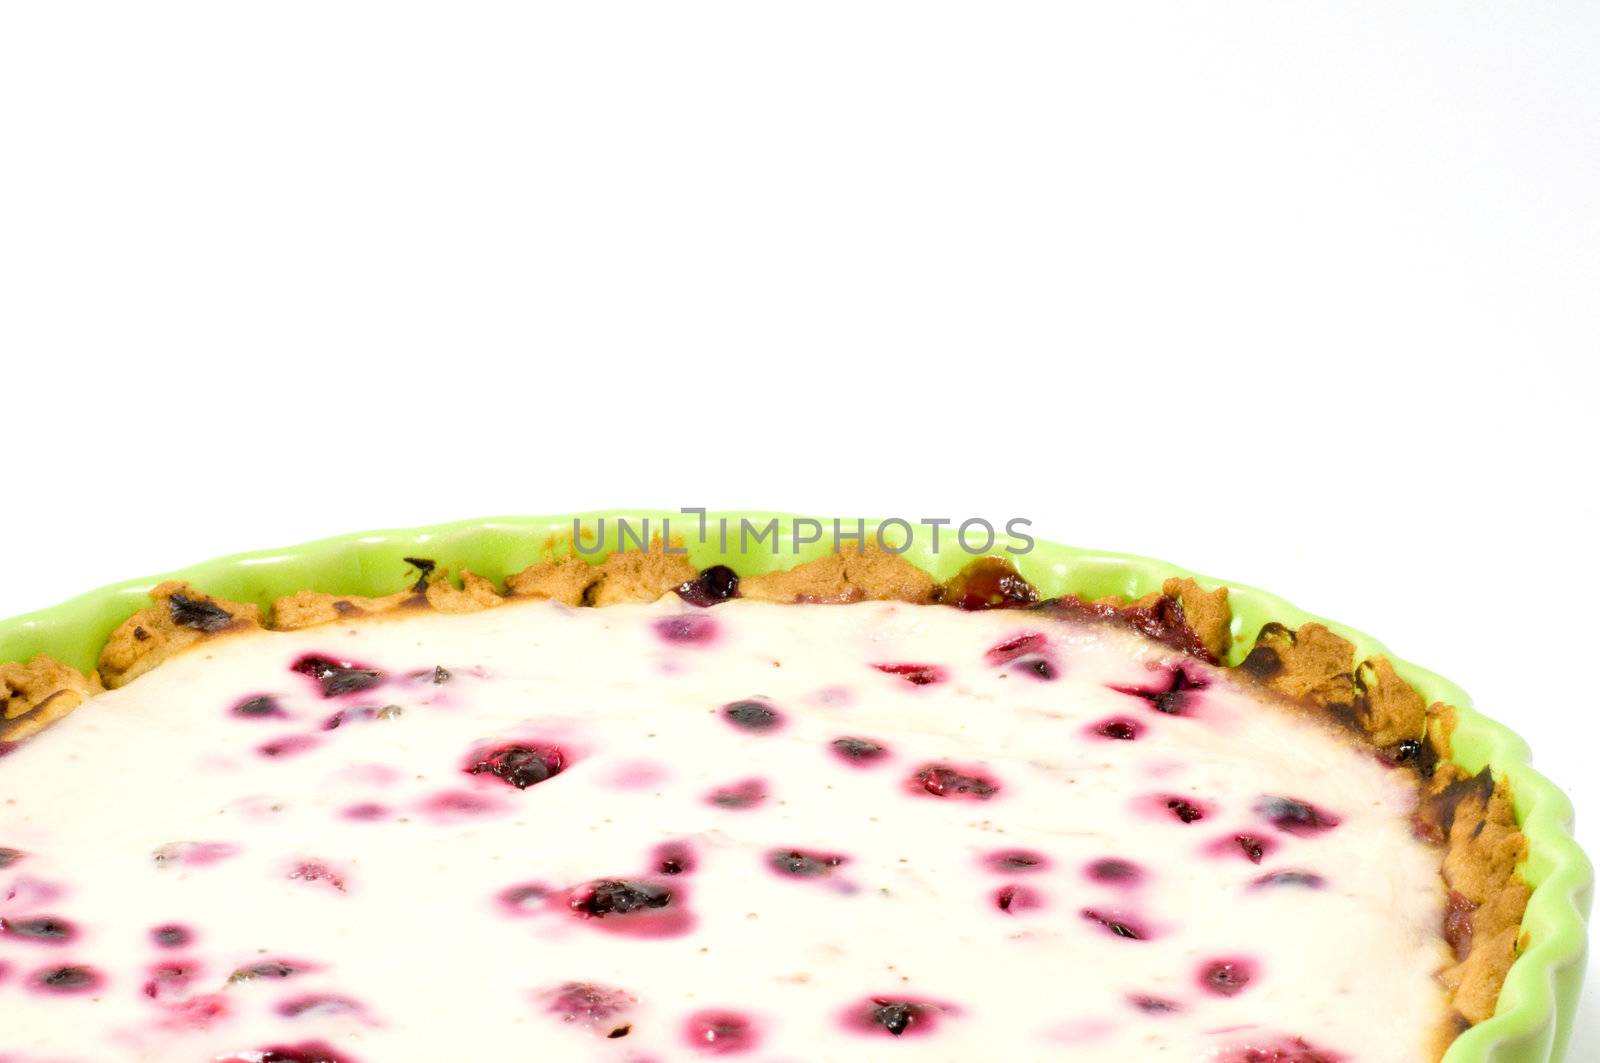 A shot of homemade berry cake, isolated